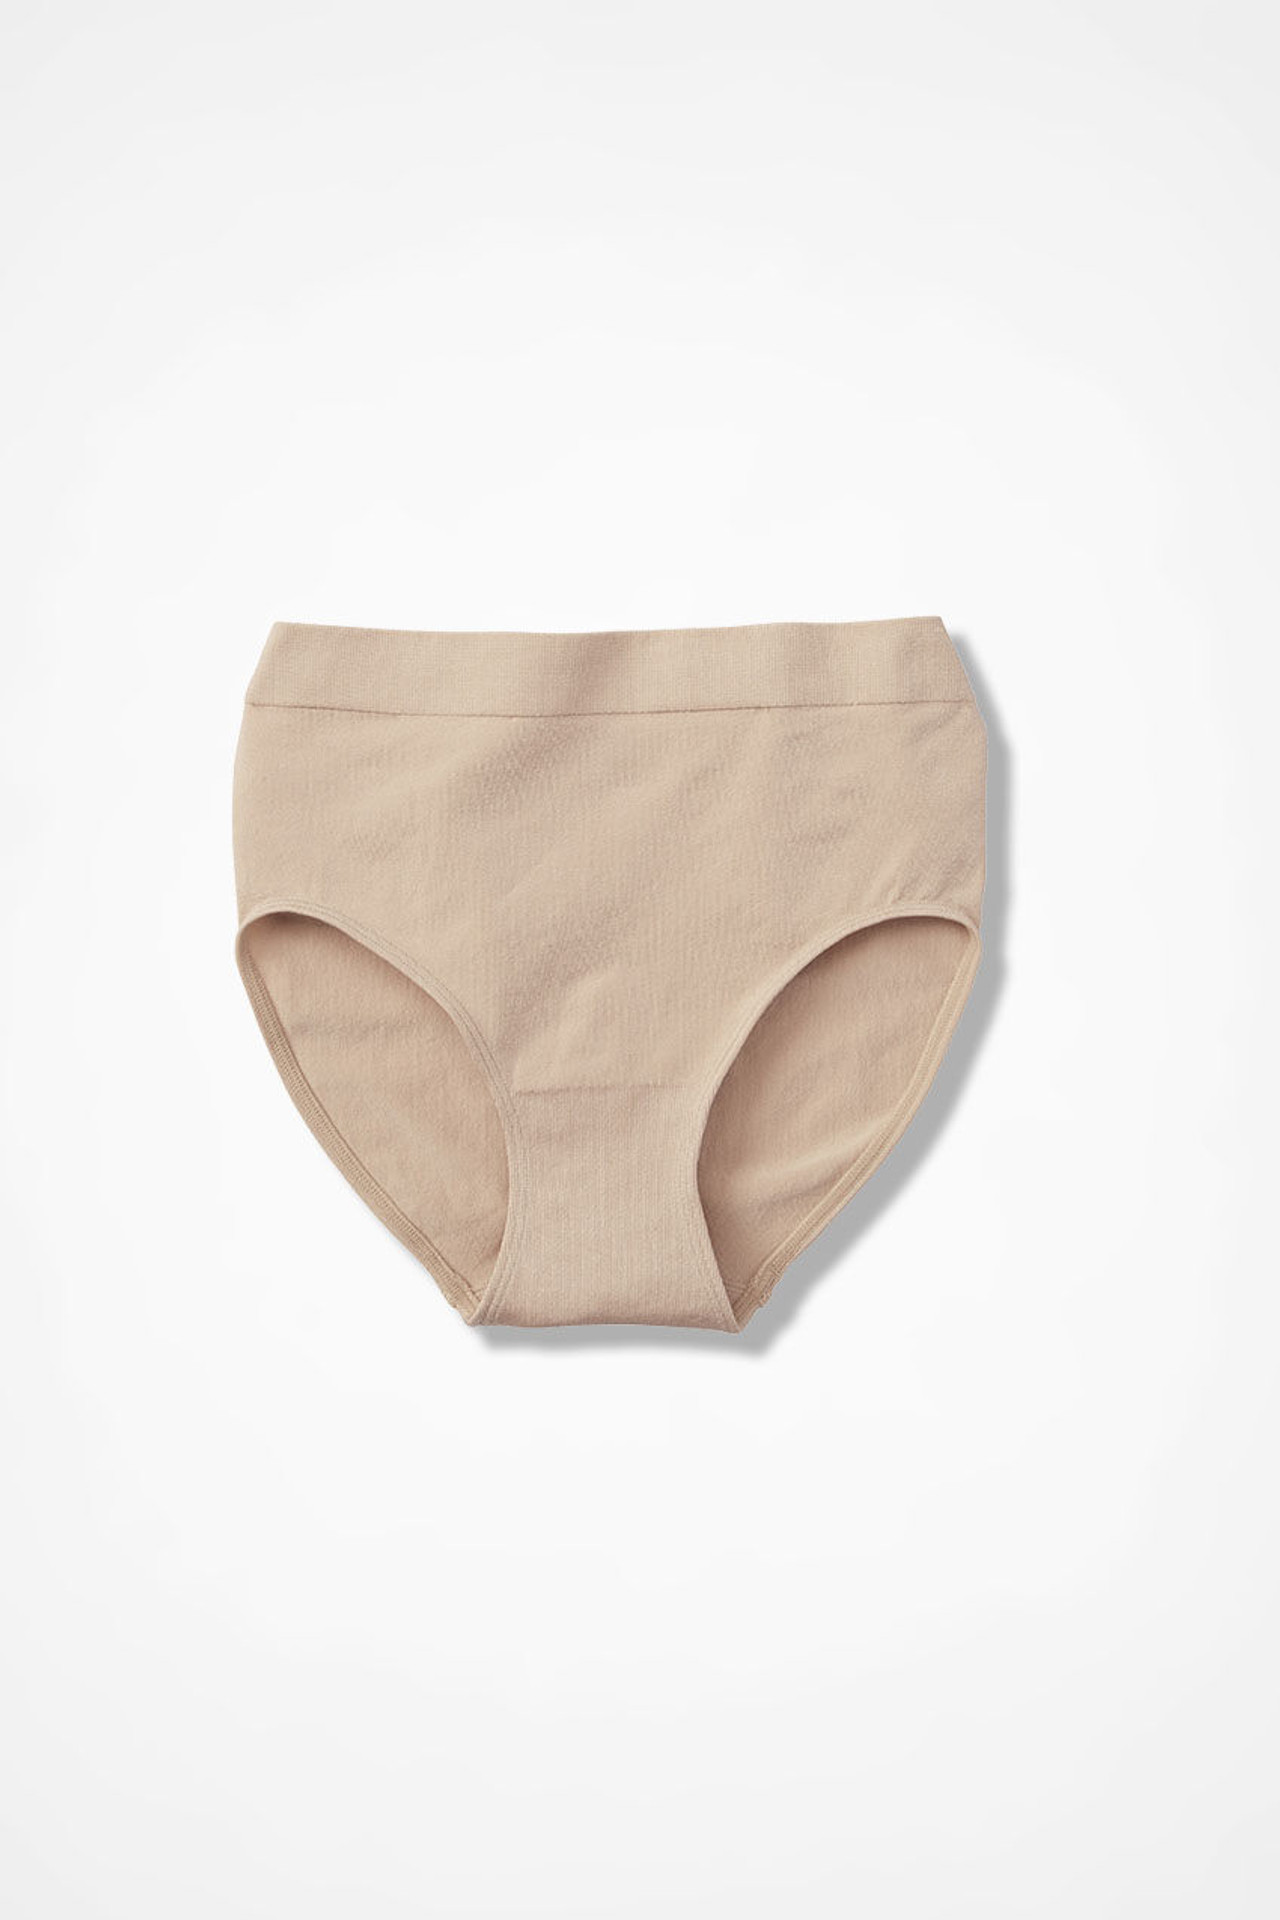 At Ease Brief Panty Sand M by Wacoal